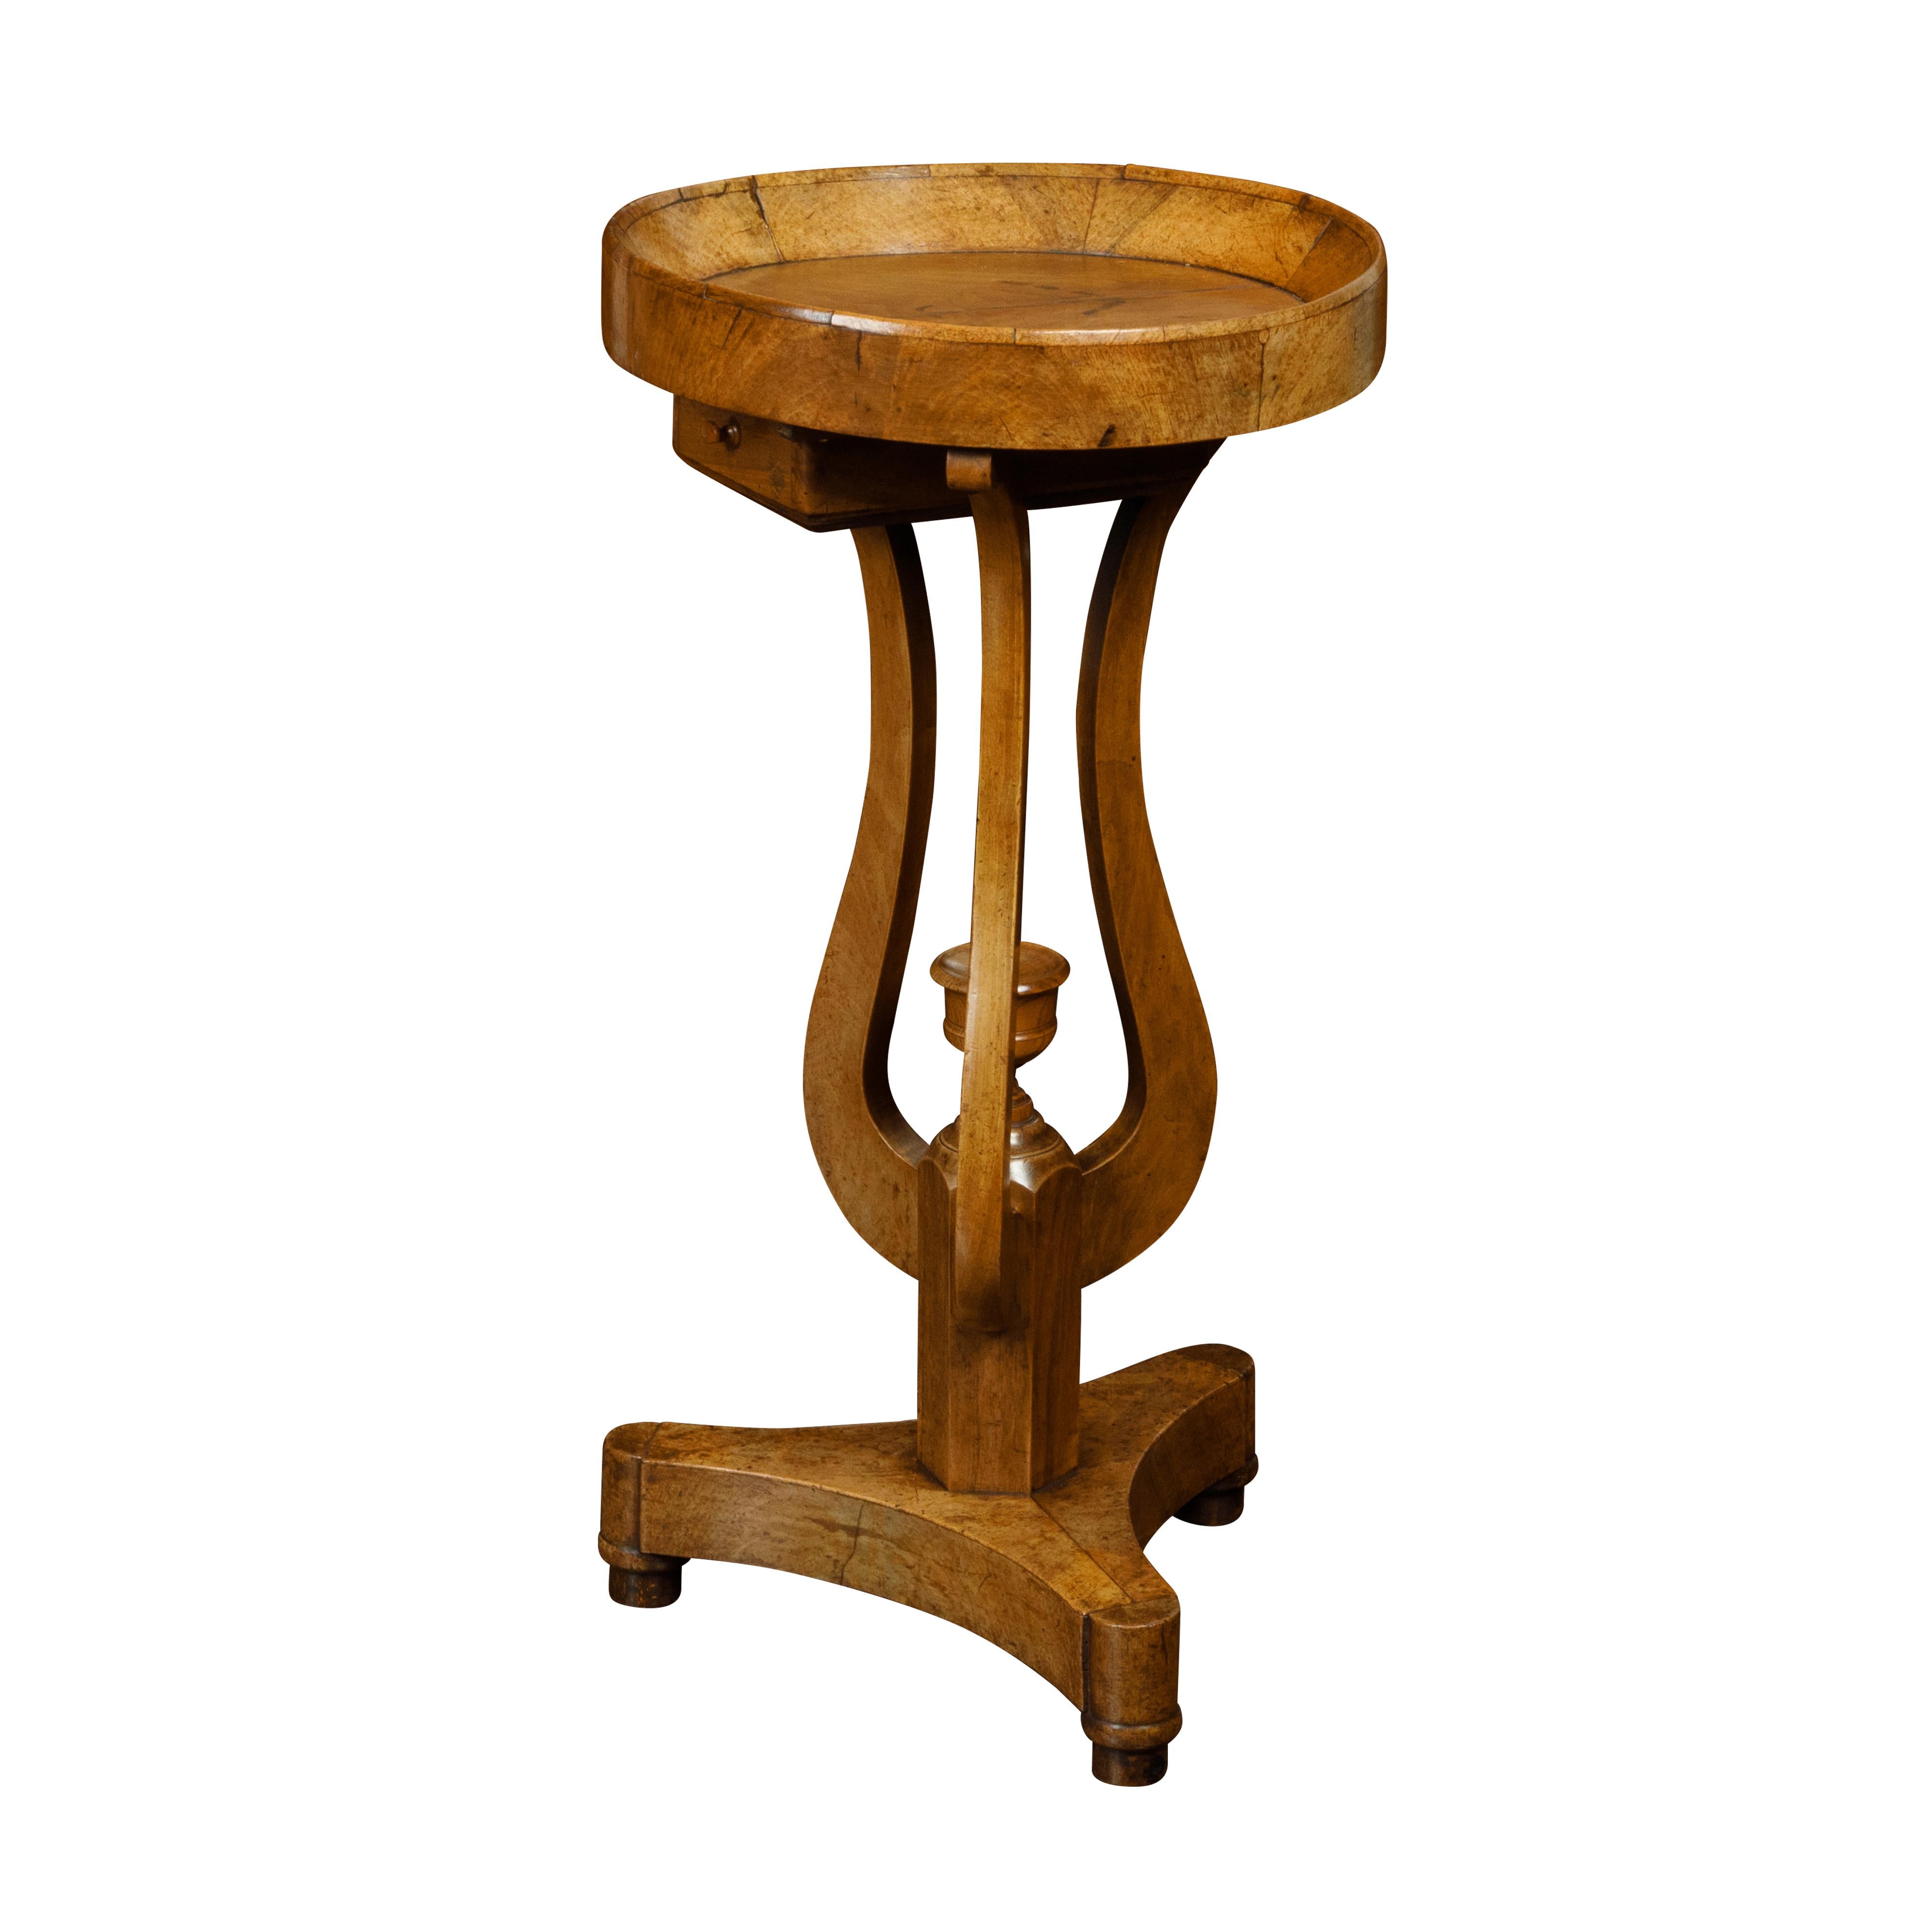 Austrian Biedermeier Period 1840s Guéridon Table with Tray Top and Lyre Base